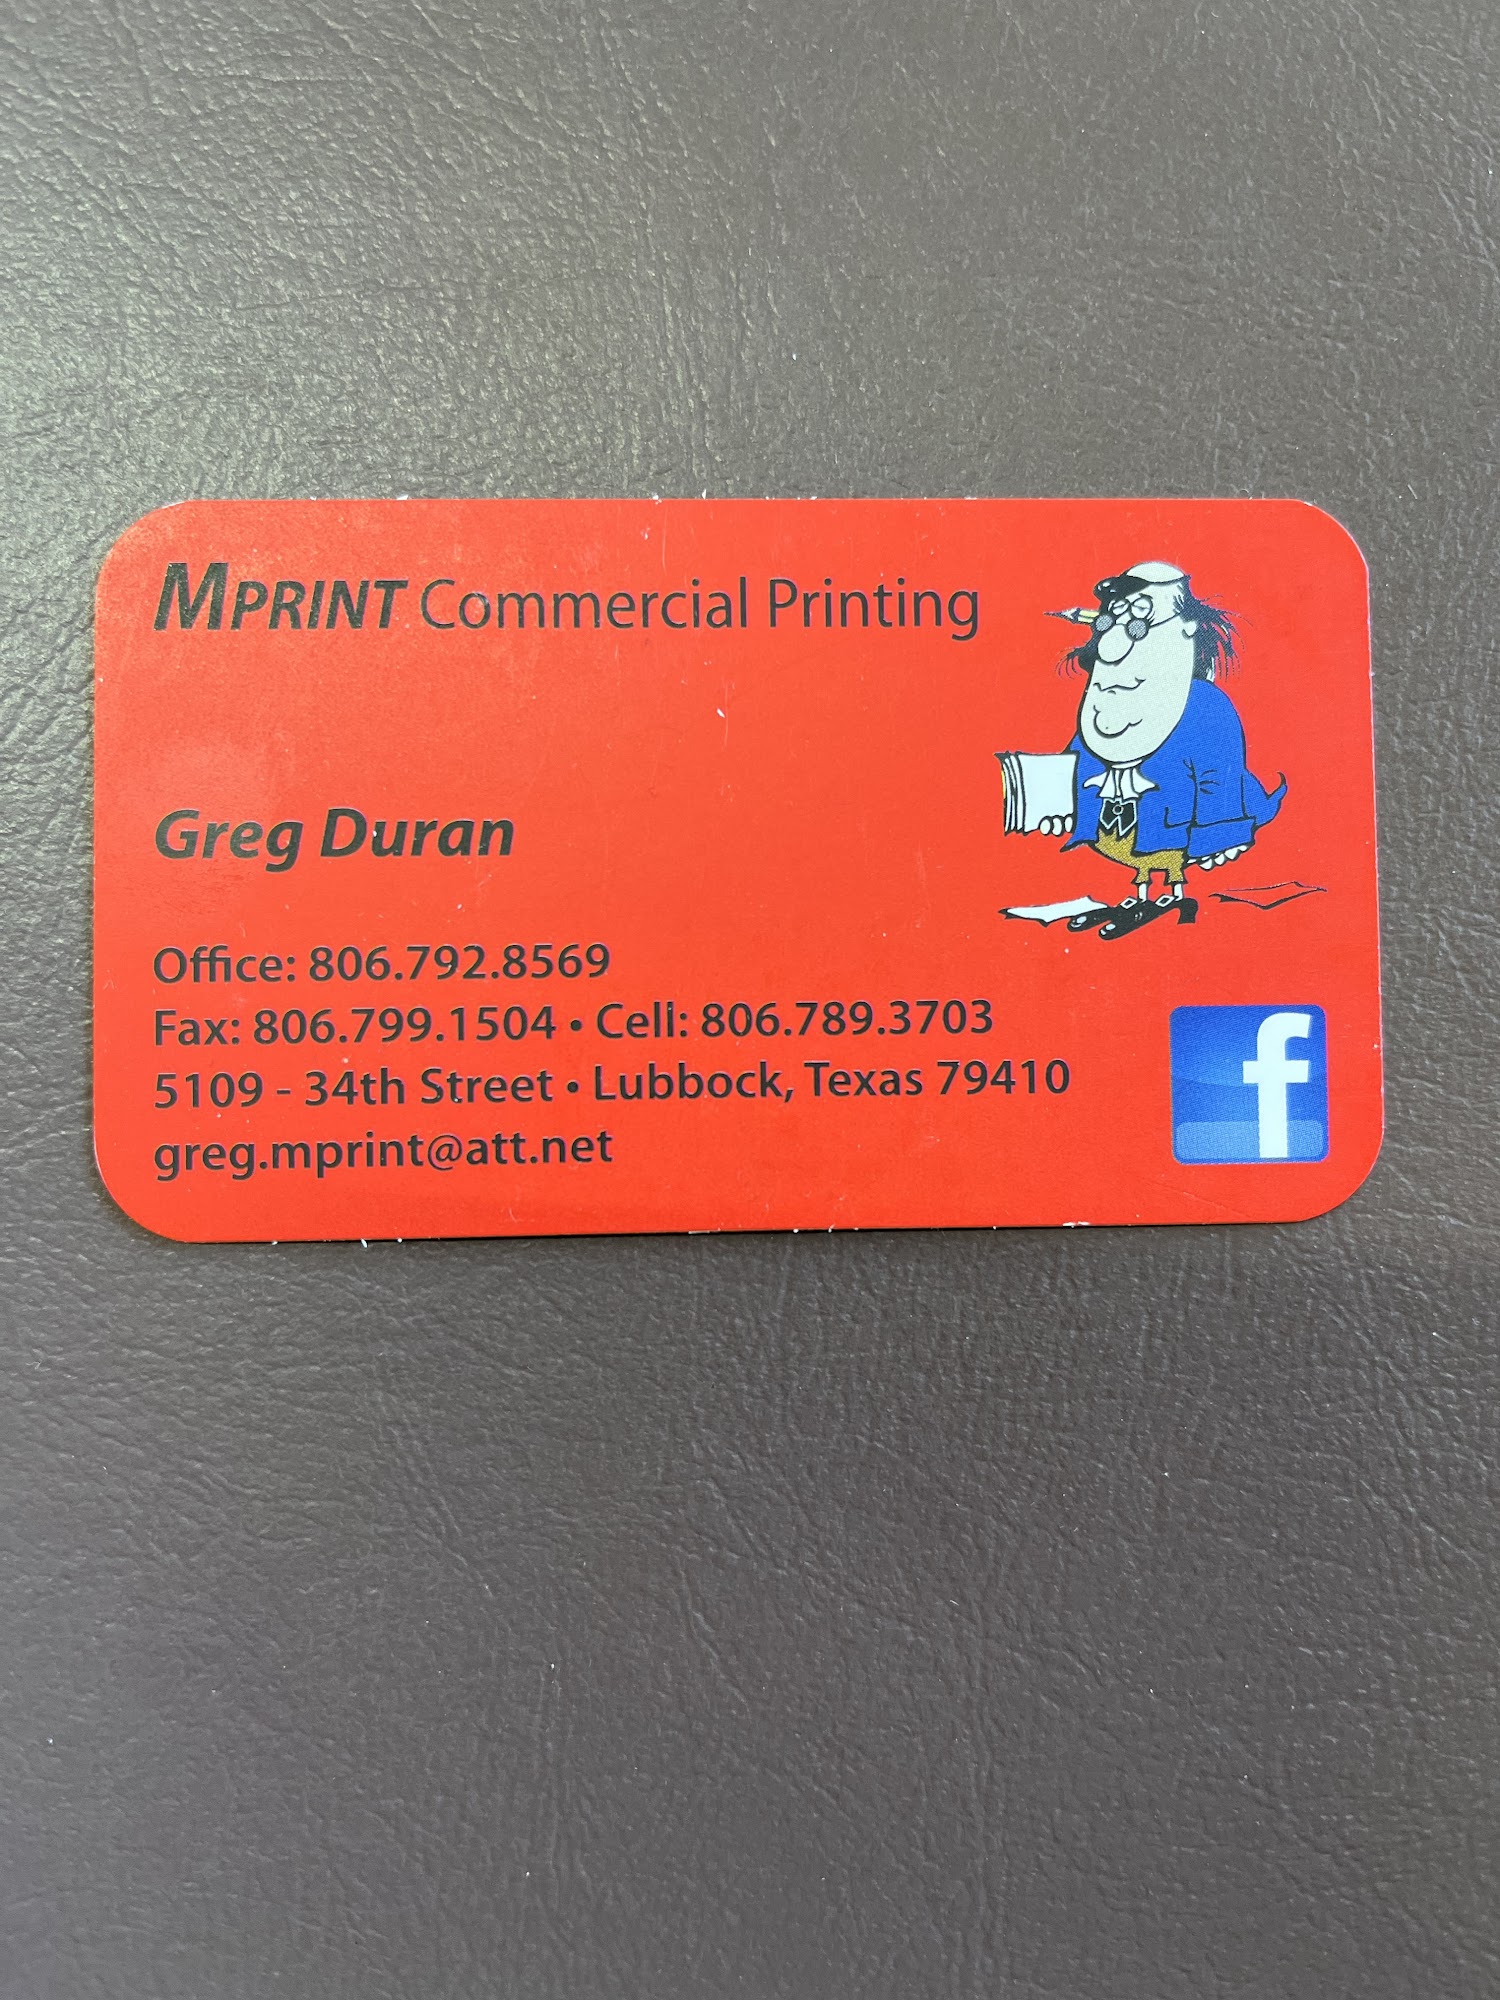 M-PRINT Commercial Printing